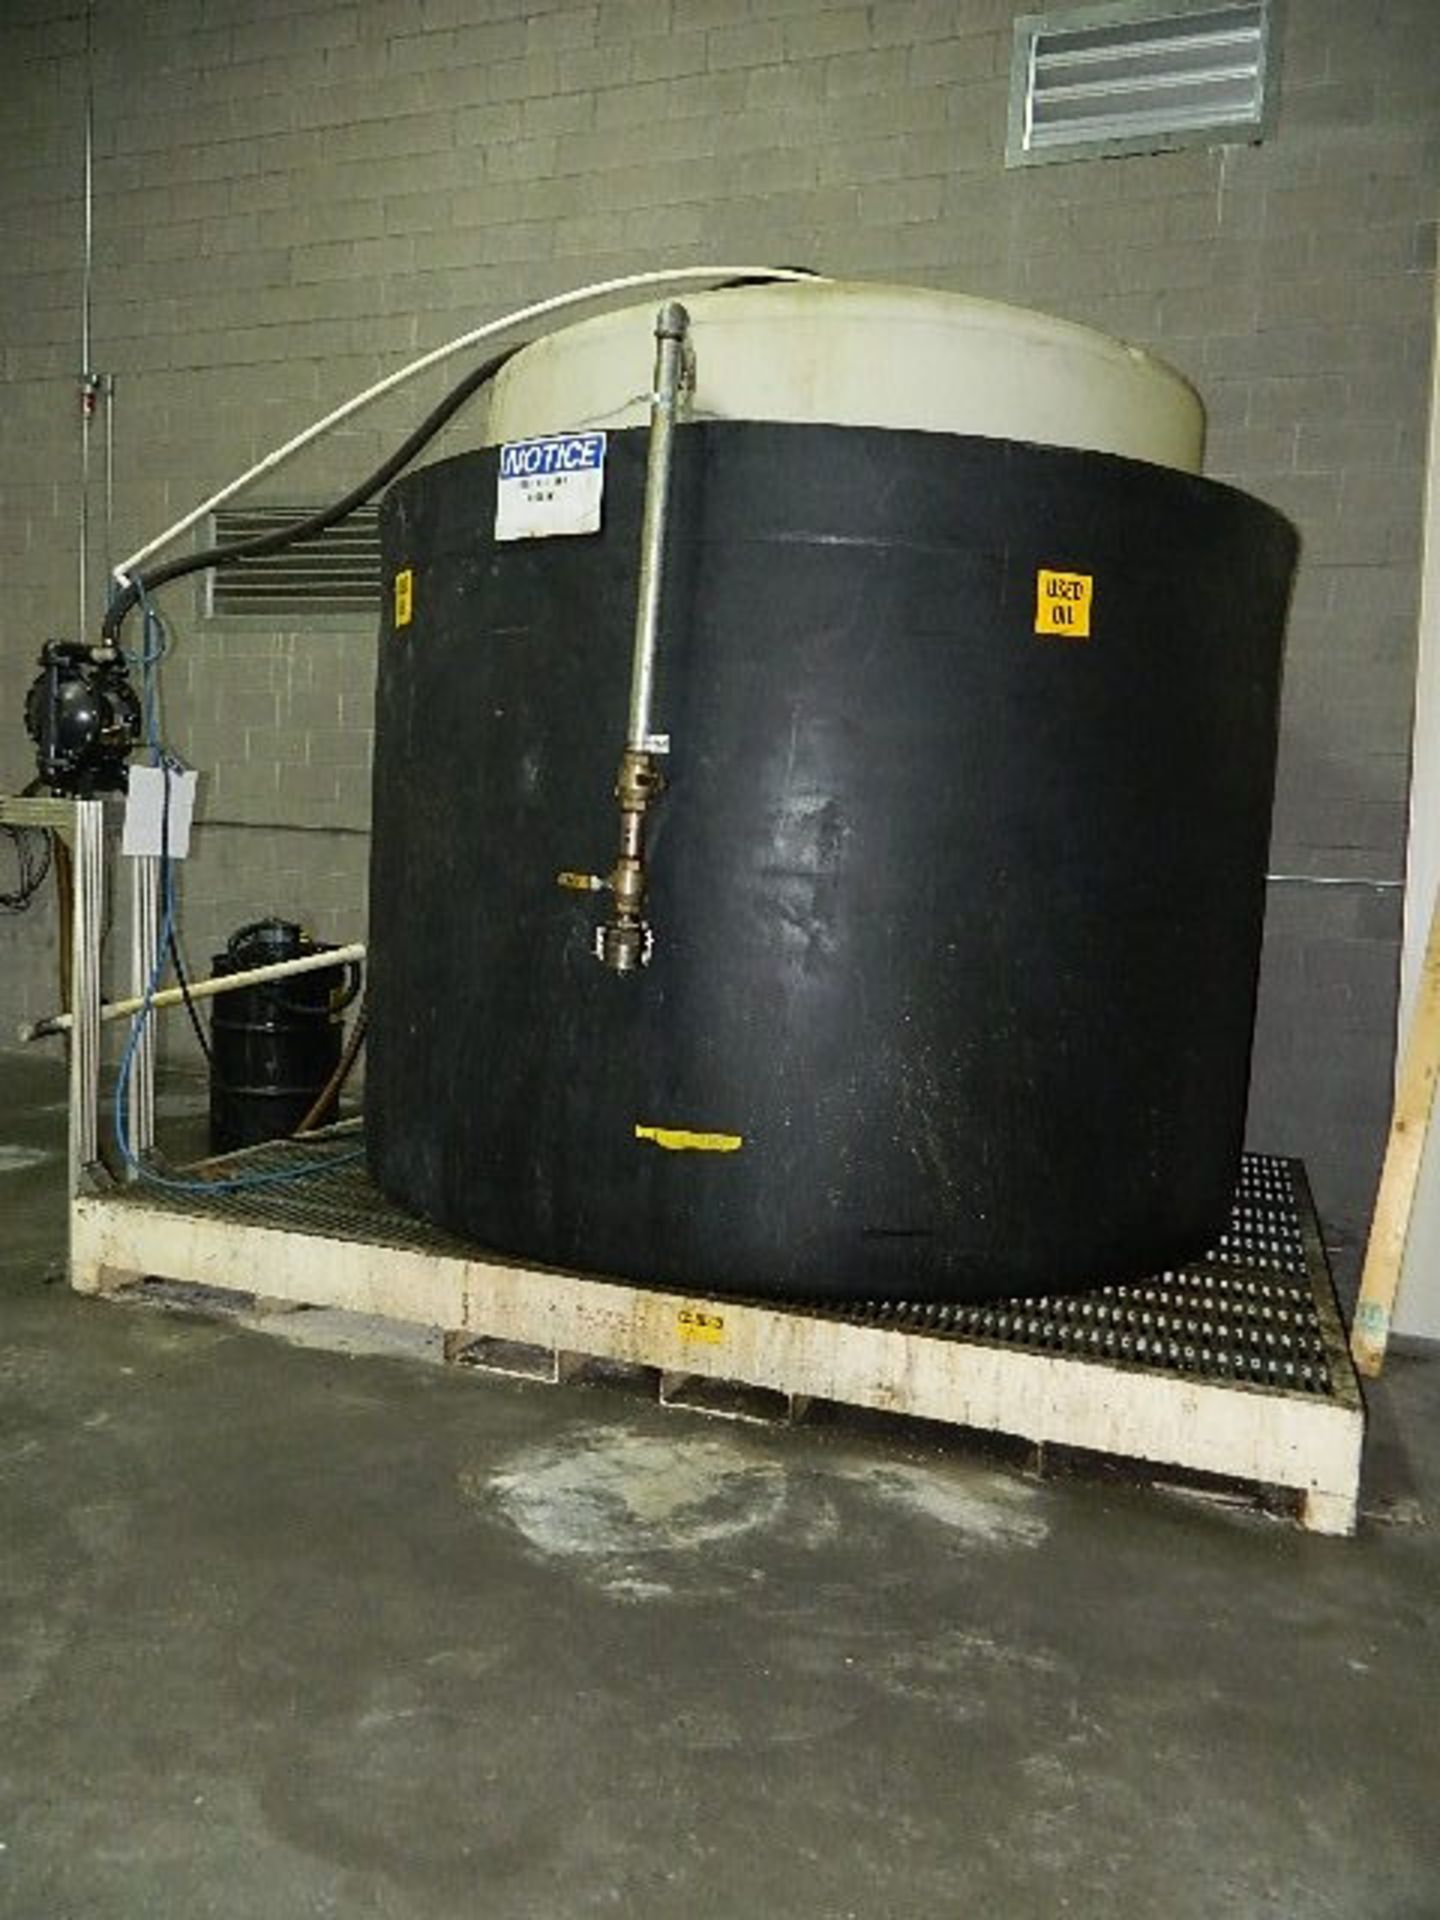 2500 Gal. Coolant Tank w/ 2500 Gal. Containment Basin & Steel Drip Basin, 10' x 12' ARO - Image 6 of 6